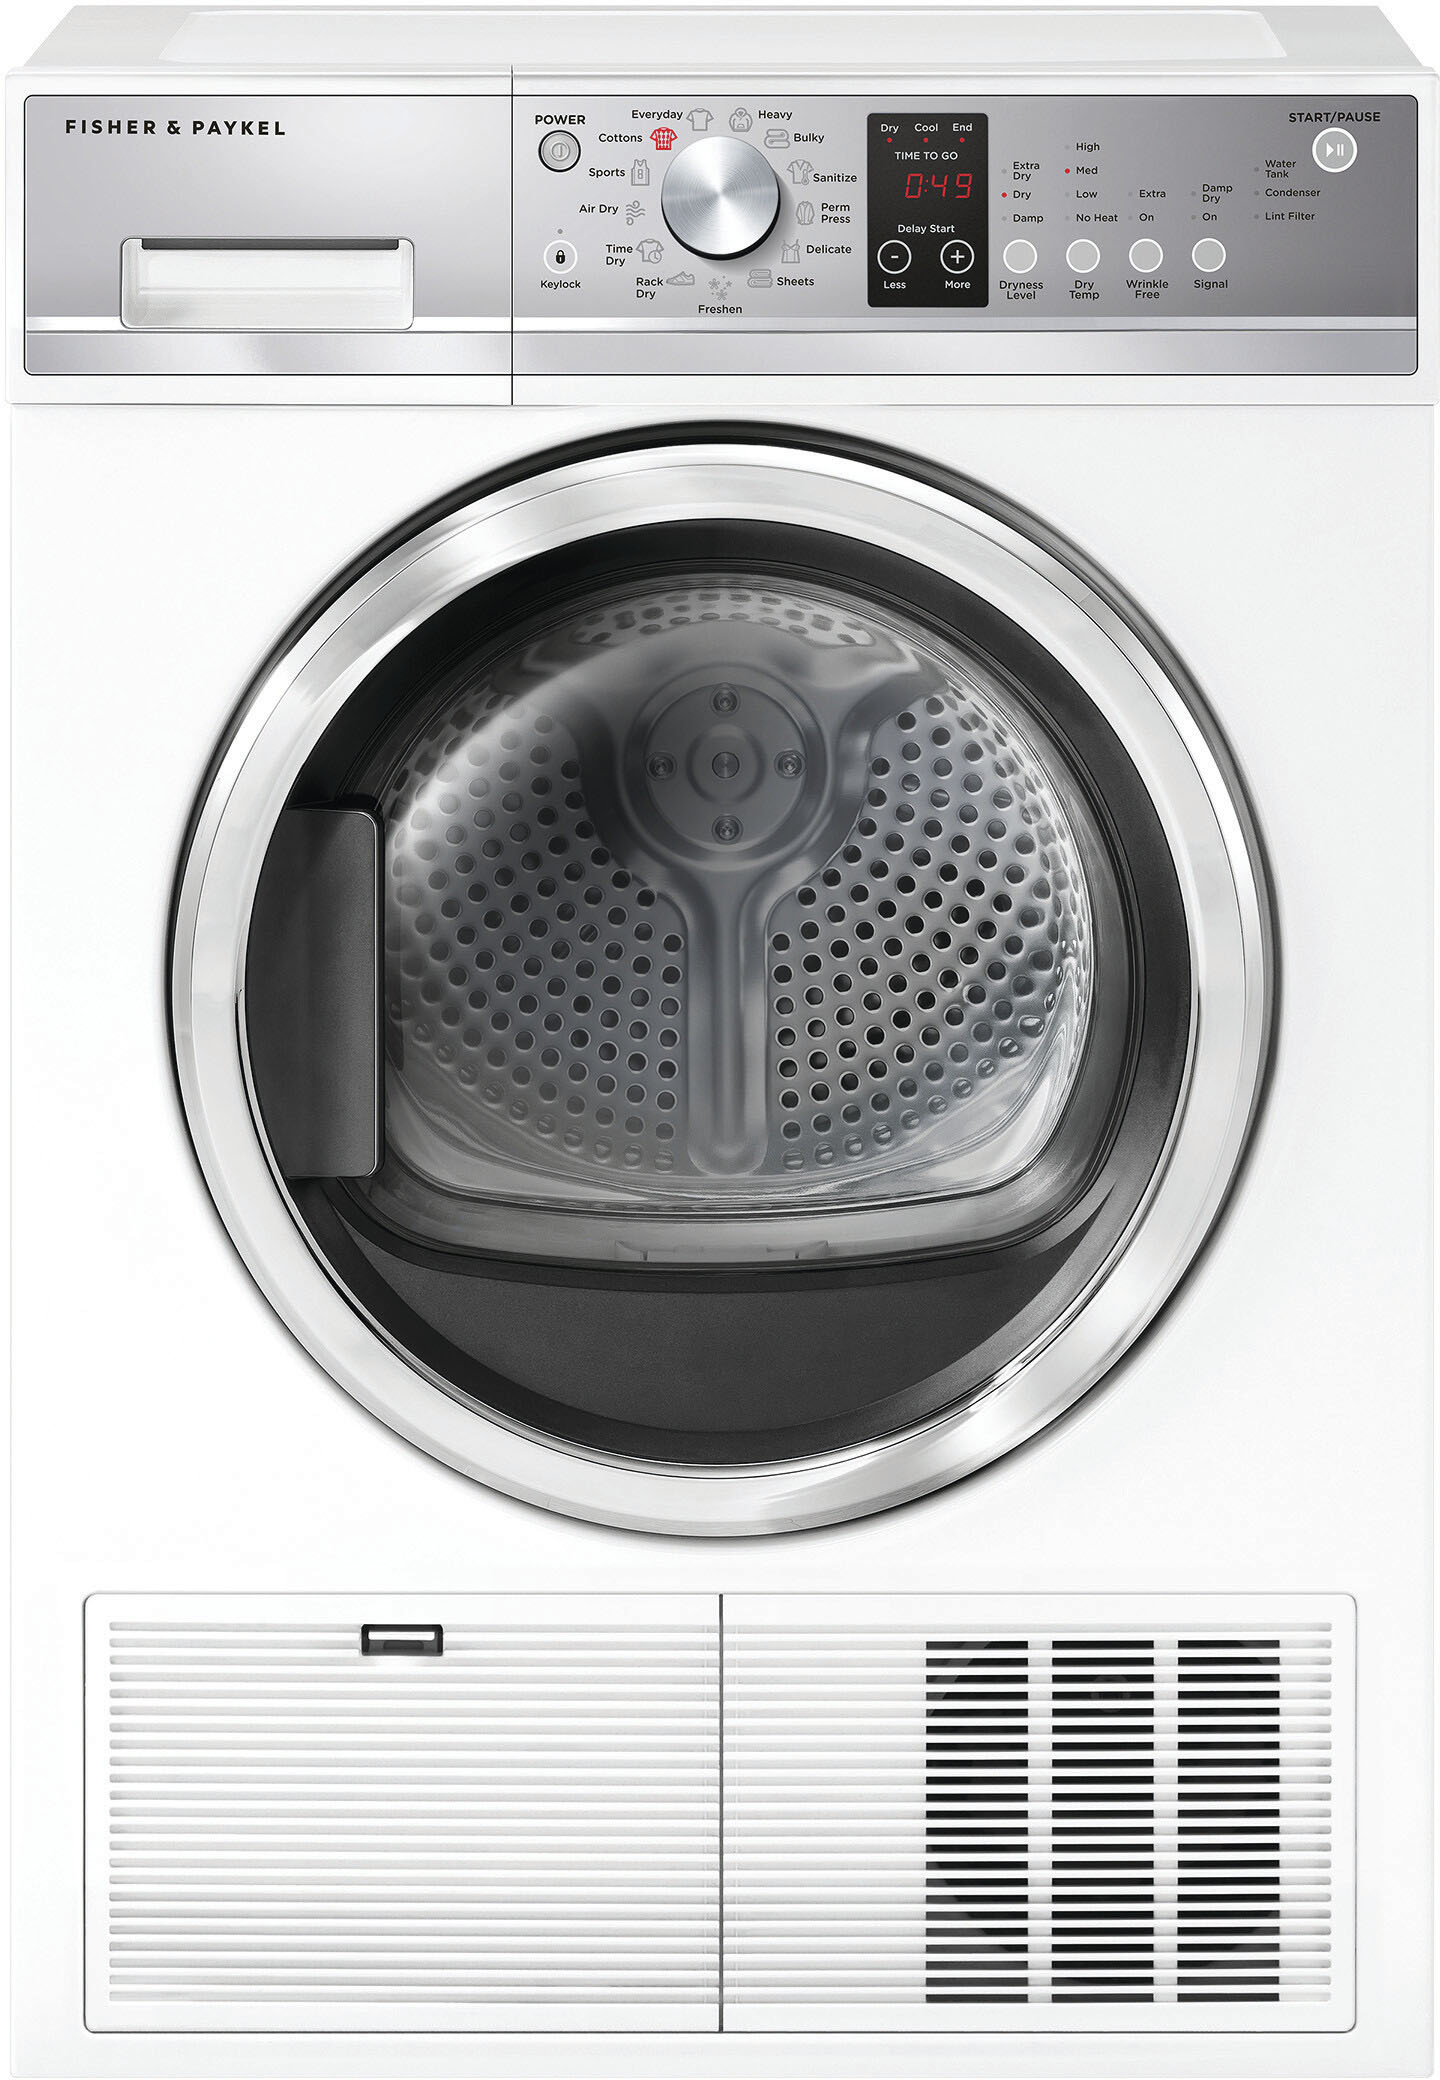 Fisher & Paykel - 4.0 cu. ft. Electric Condensing Dryer - White